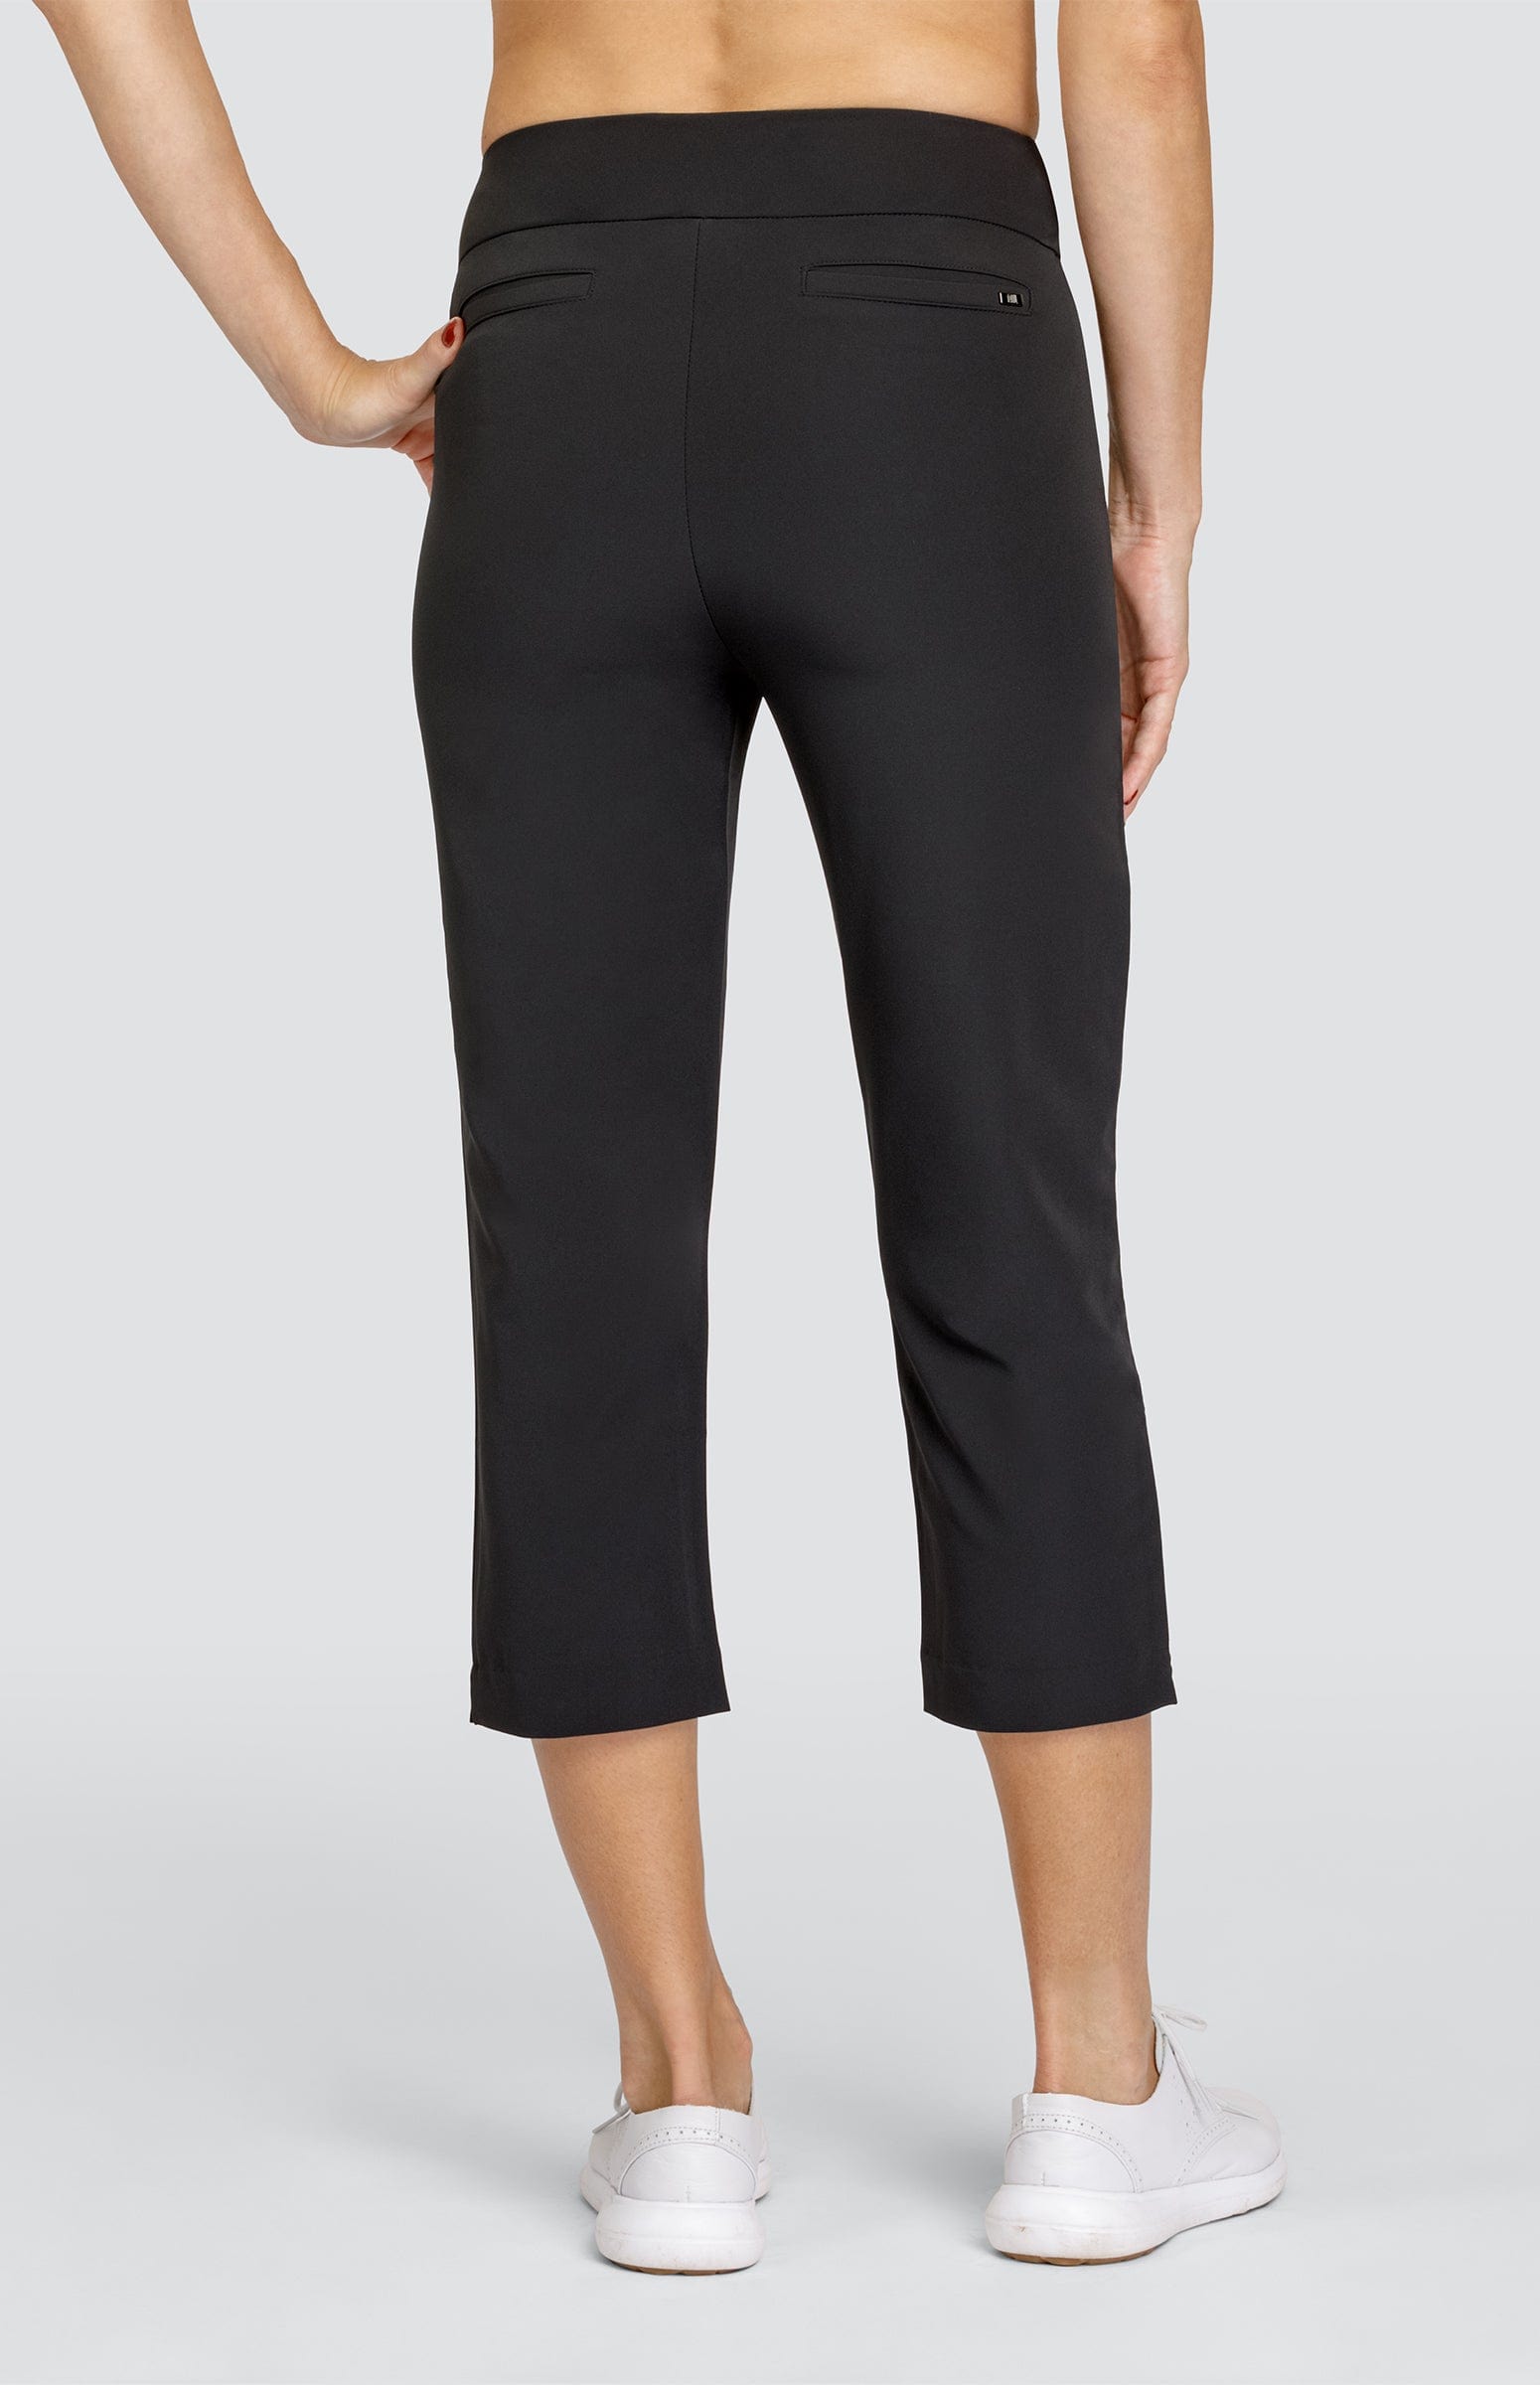 Tail Allure Long Golf Pant